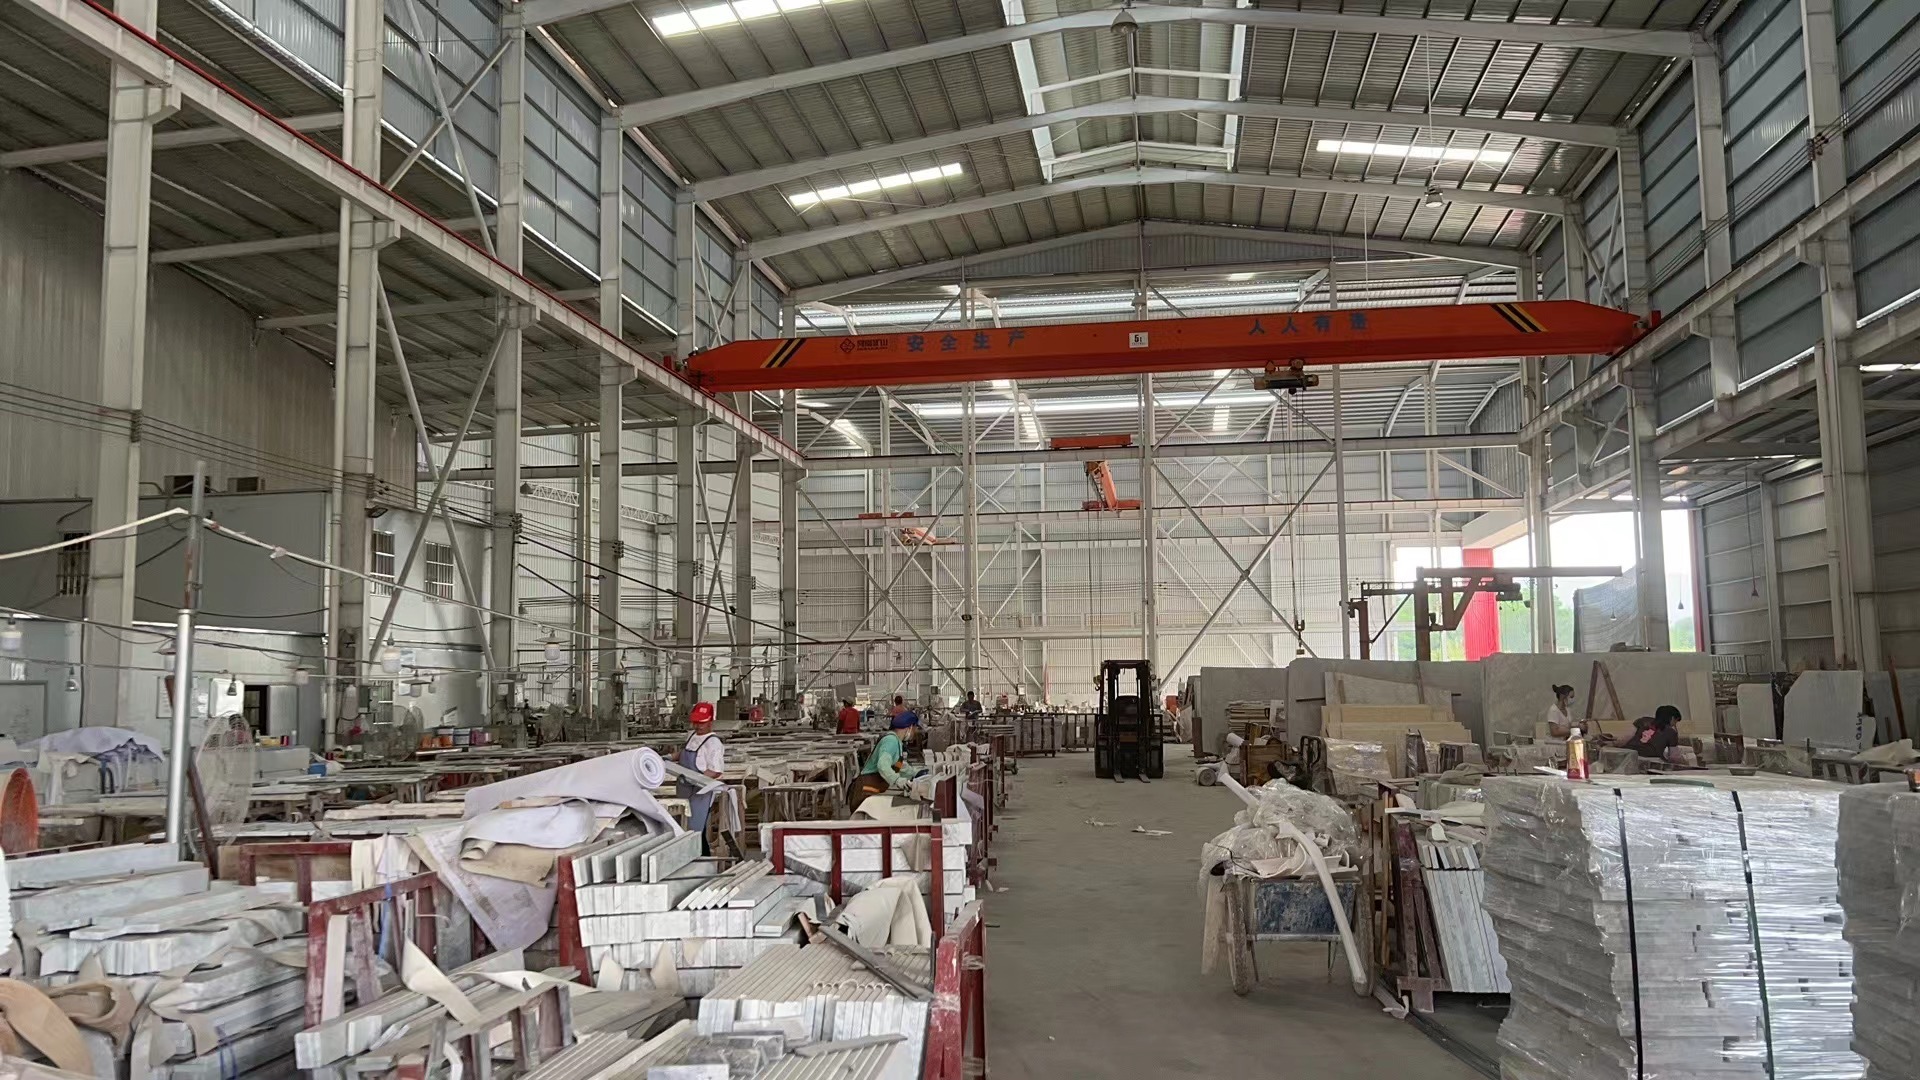 About Marble stone suppliers